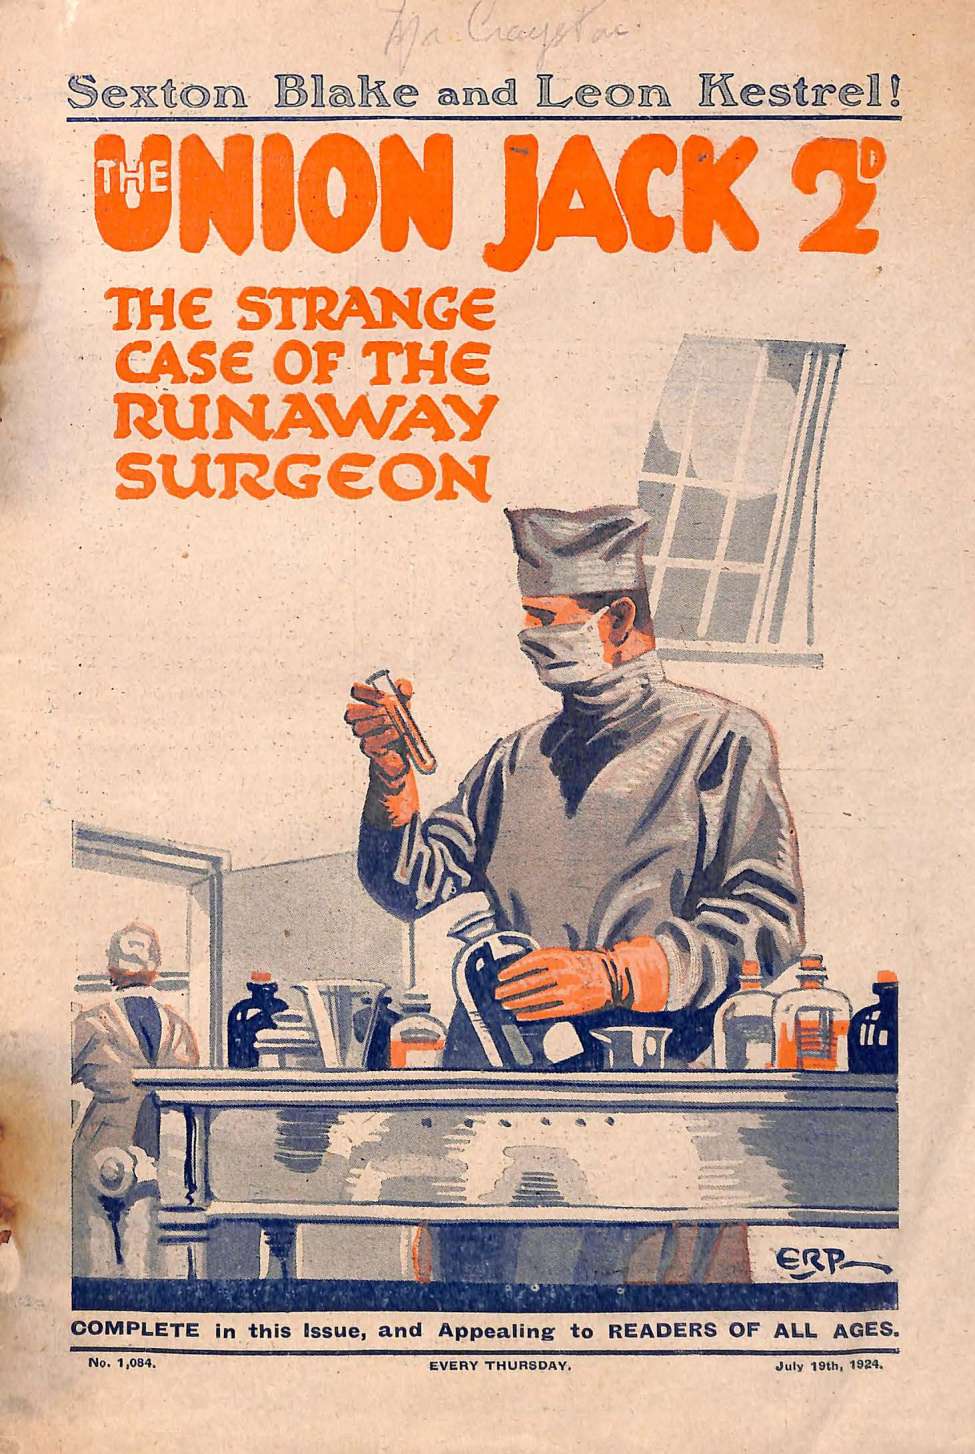 Book Cover For Union Jack 1084 - The Strange Case of the Runaway Surgeon